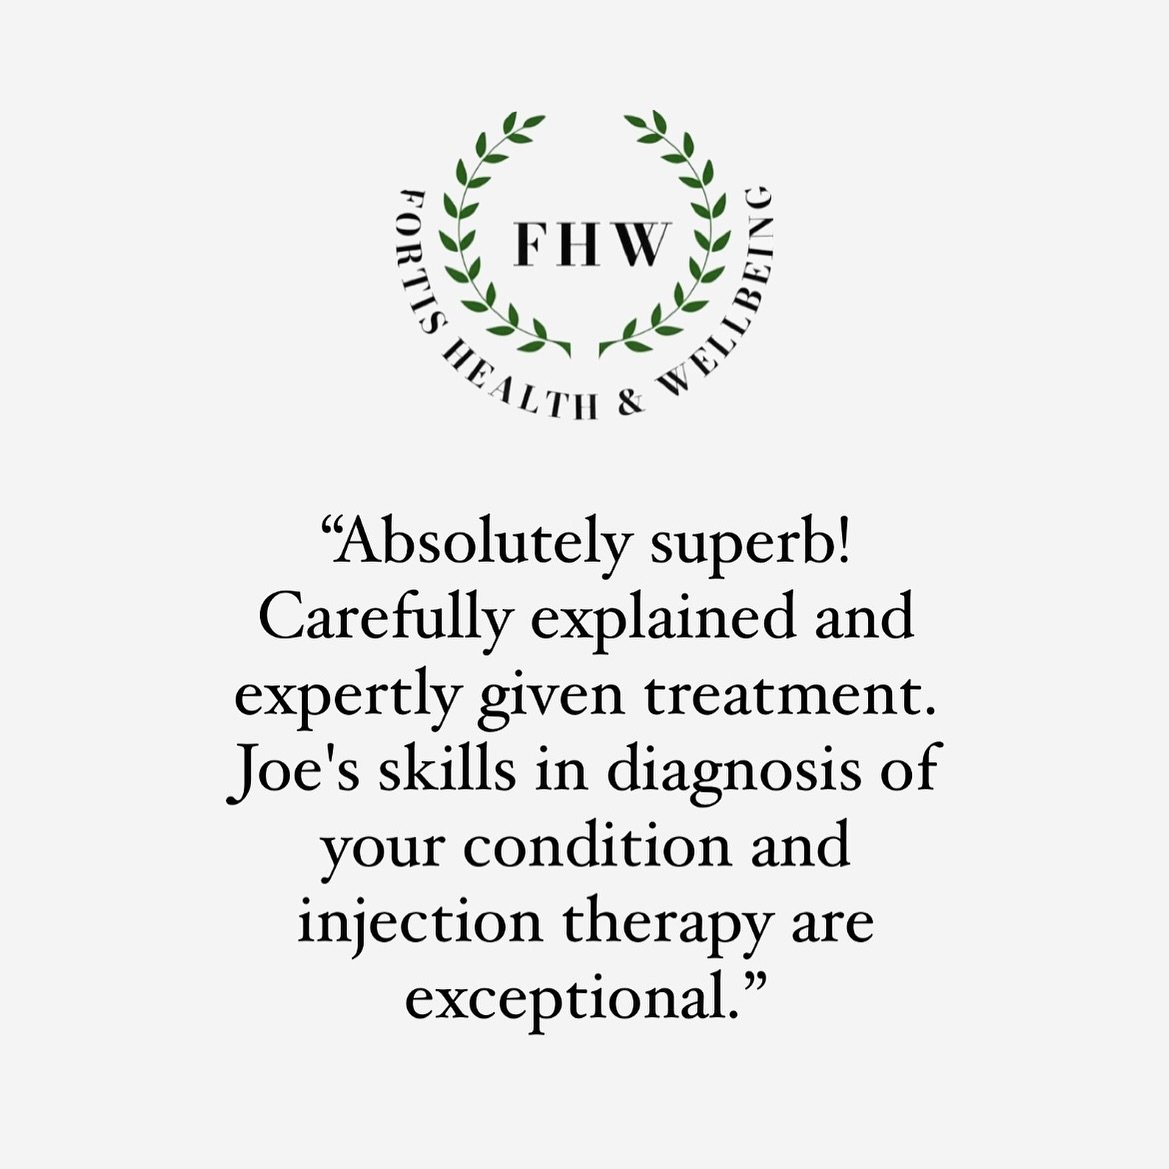 🌿 REVIEW OF THE WEEK 🌿

So happy to receive another fantastic review this week. This lovely client received injection therapy from Joe for her arthritic knee. So glad we could help! ⭐️ 

&ldquo;Absolutely superb! Carefully explained and expertly gi